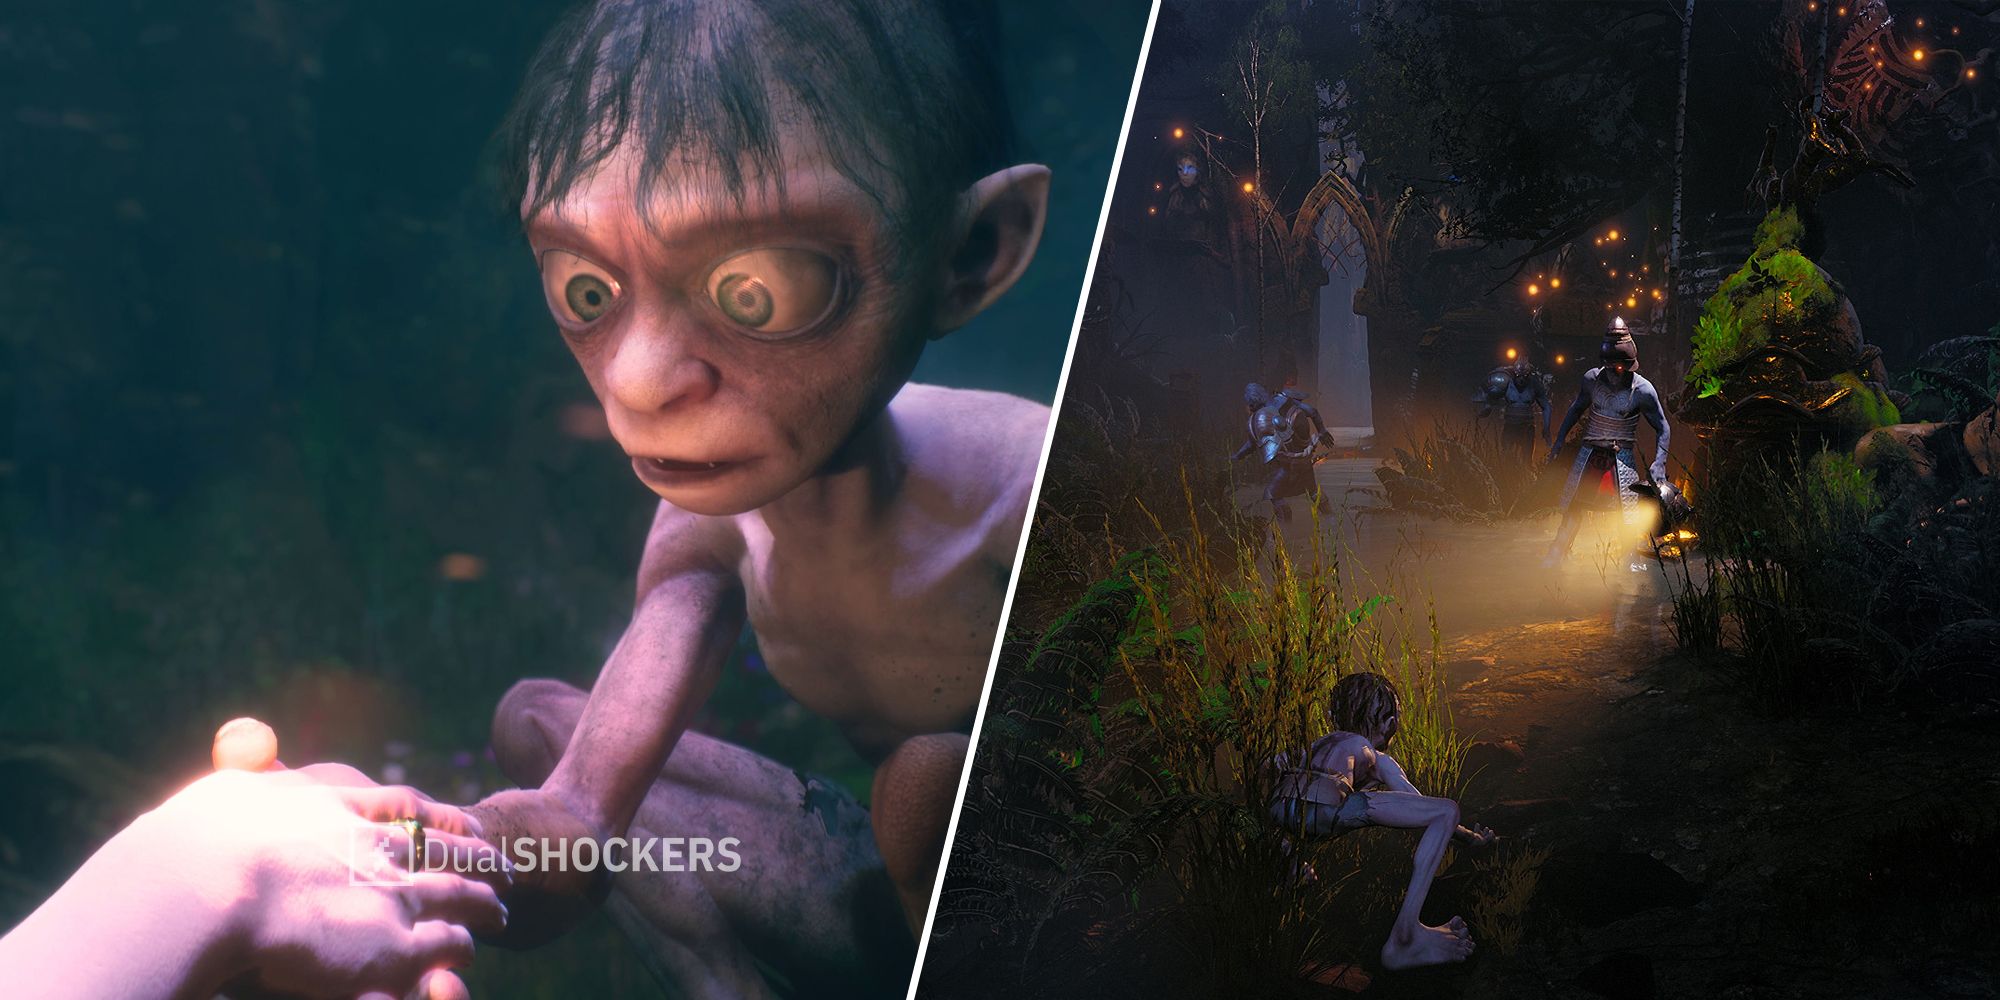 The Lord Of The Rings: Gollum Gets New May Release Date - Game